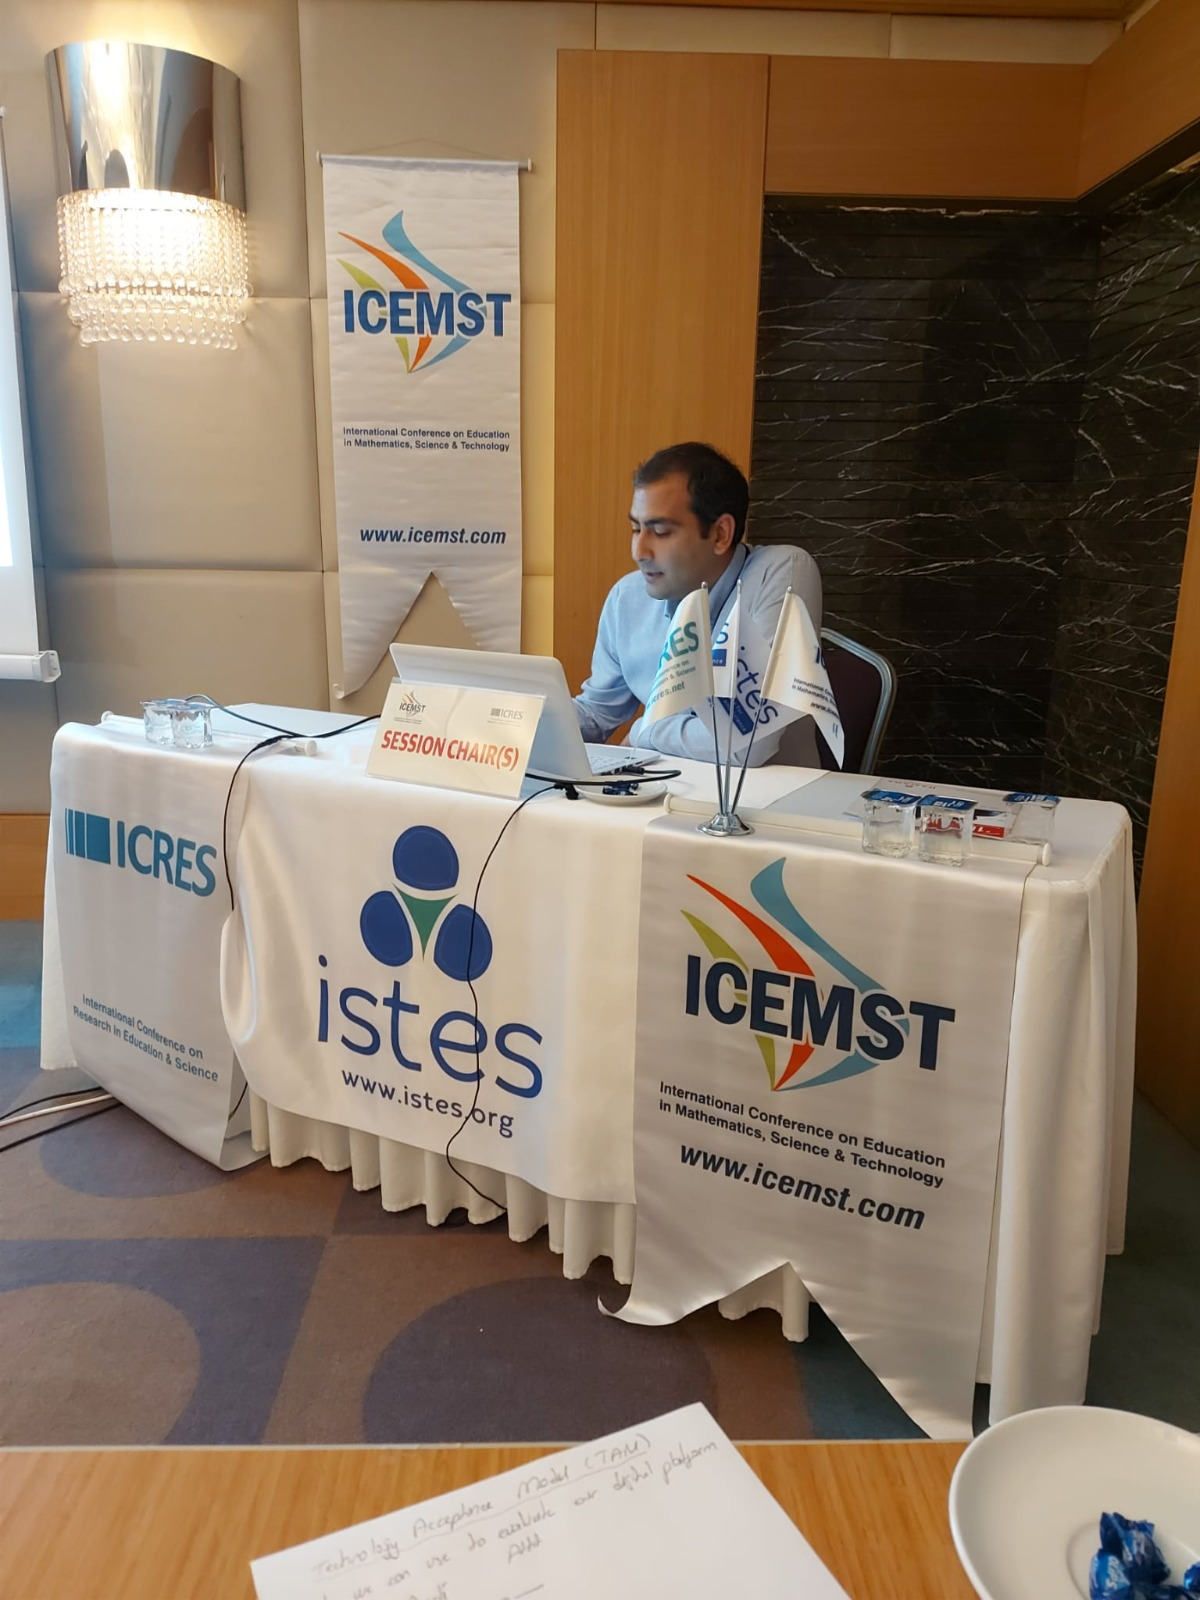 International Conference on Education in Mathematics, Science and Technology (ICEMST) 